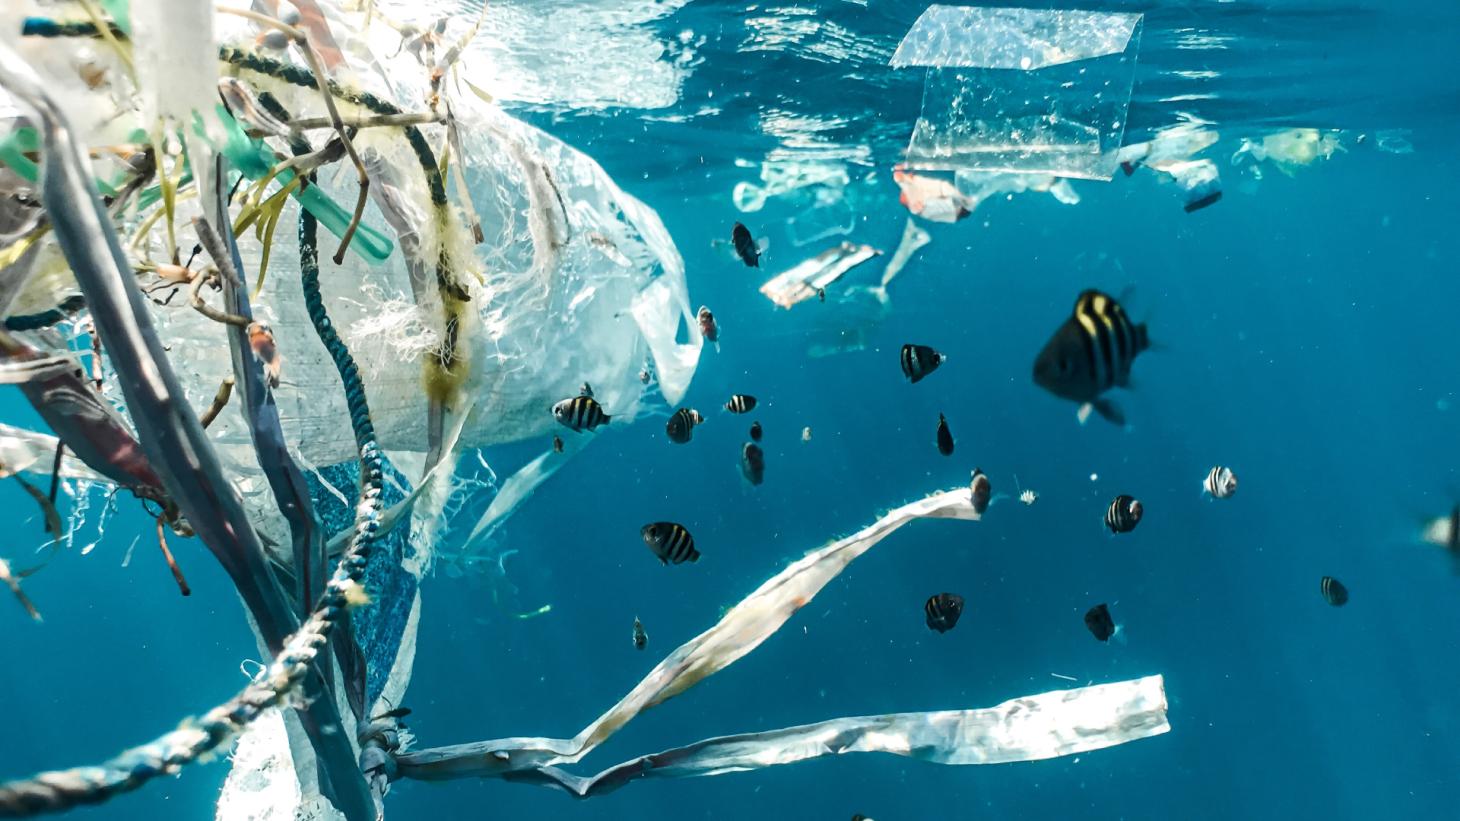 Fish swimming amidst plastic waste in the ocean